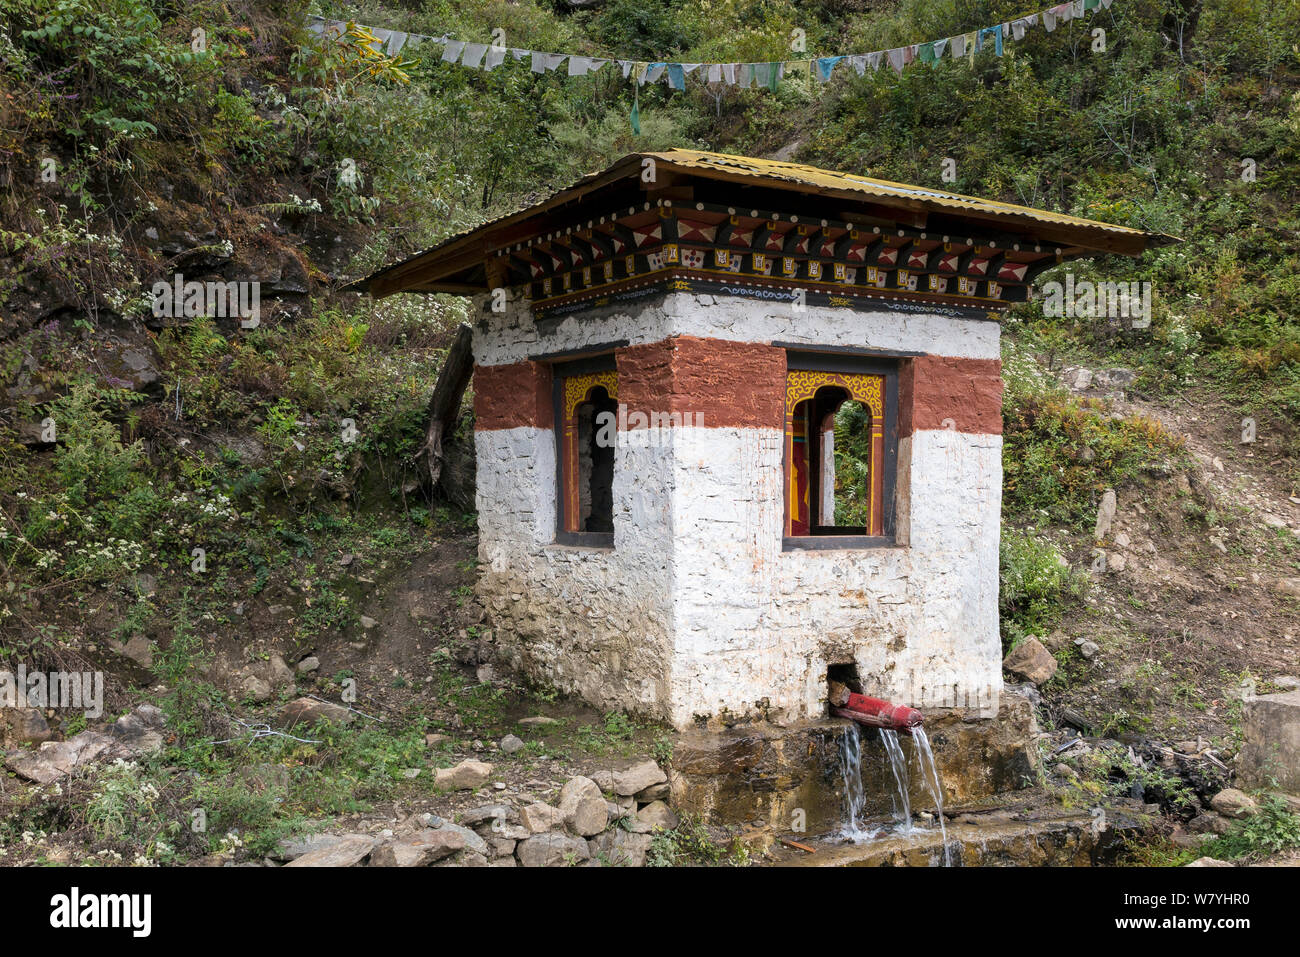 Phallic water spout on a stupa (chorten) inspired by the &#39;Divine Mad Man&#39; Drukpa Kunley who is said to have given blessings to women via intercourse, Paro River Valley. Bhutan, October 2014. Stock Photo